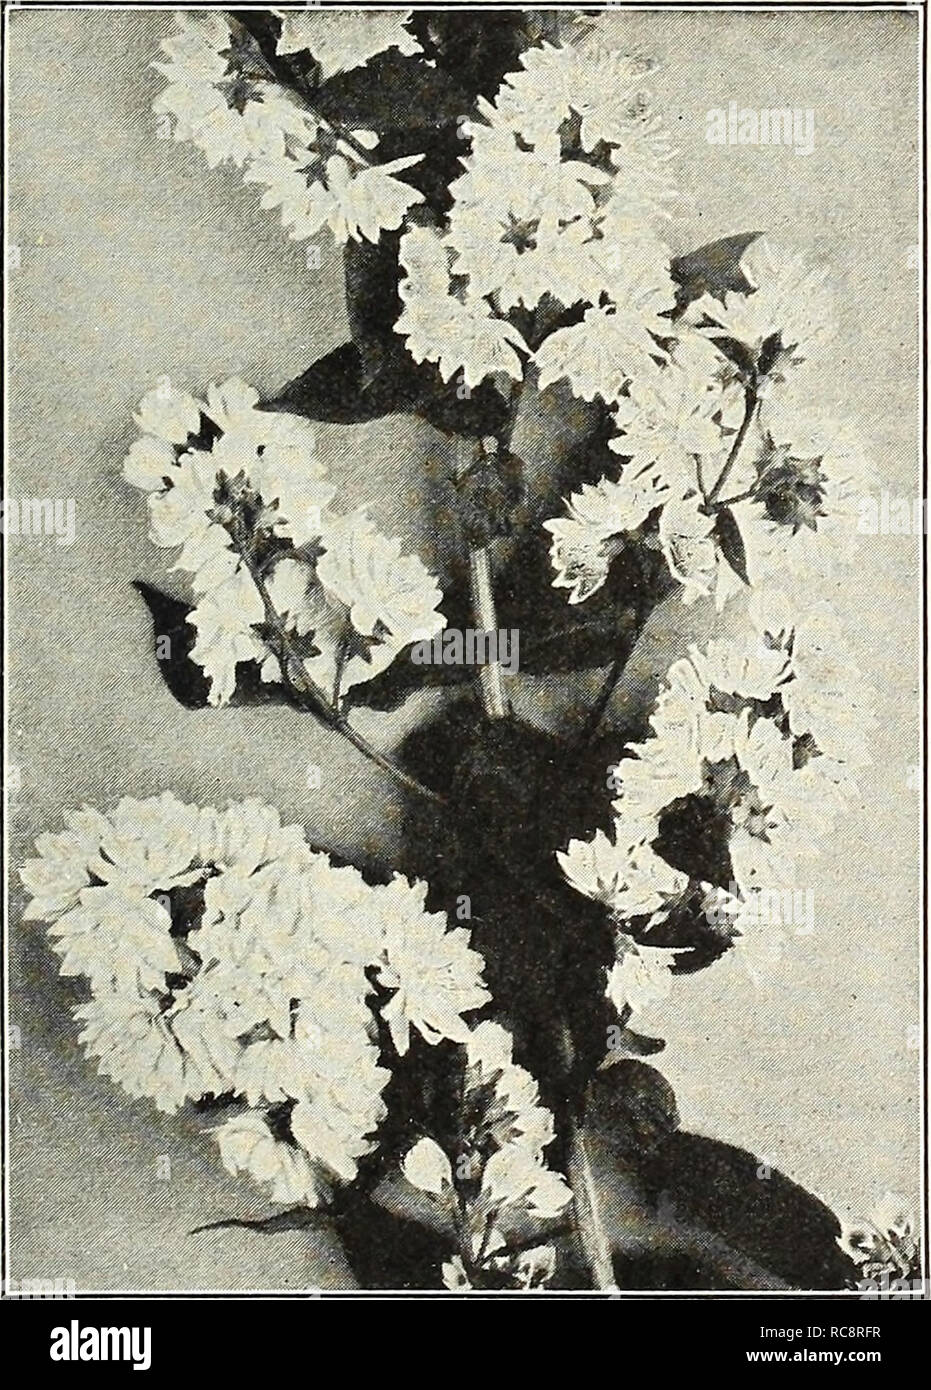 . Dreer's garden book 1922. Seeds Catalogs; Nursery stock Catalogs; Gardening Equipment and supplies Catalogs; Flowers Seeds Catalogs; Vegetables Seeds Catalogs; Fruit Seeds Catalogs. Corchorus. Deutzia Crbnata Magnifica Deutzia Crenata Magnifica. A most distinct new variety with exceptionally large corymbs of pure white flowers, produced in wonderful profusion, plant of symmetrical habit, growing from 3 to 4 feet high. 60 cts. each. rosea plena (Double-flowering Deutzia). Double white, tinged with pink; very desirable tall Shrub. 60 cts. each. — Qracills. A favorite dwarf bush, covered with s Stock Photo